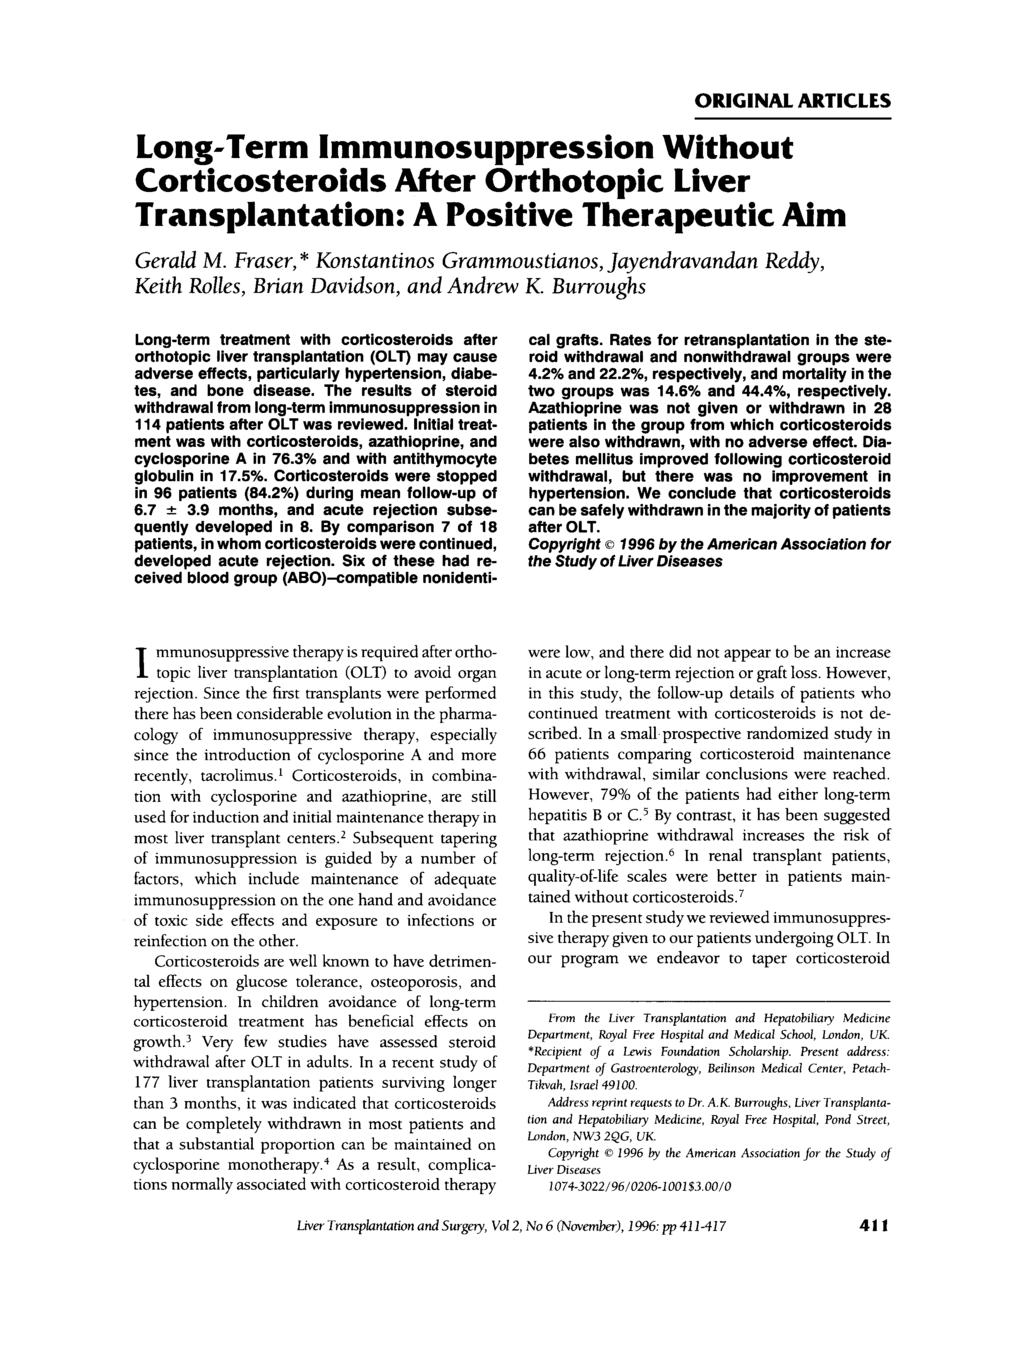 ORIGINAL ARTICLES Long-Term Immunosuppression Without Corticosteroids After Orthotopic Liver Transplantation: A Positive Therapeutic Aim Gerald M.